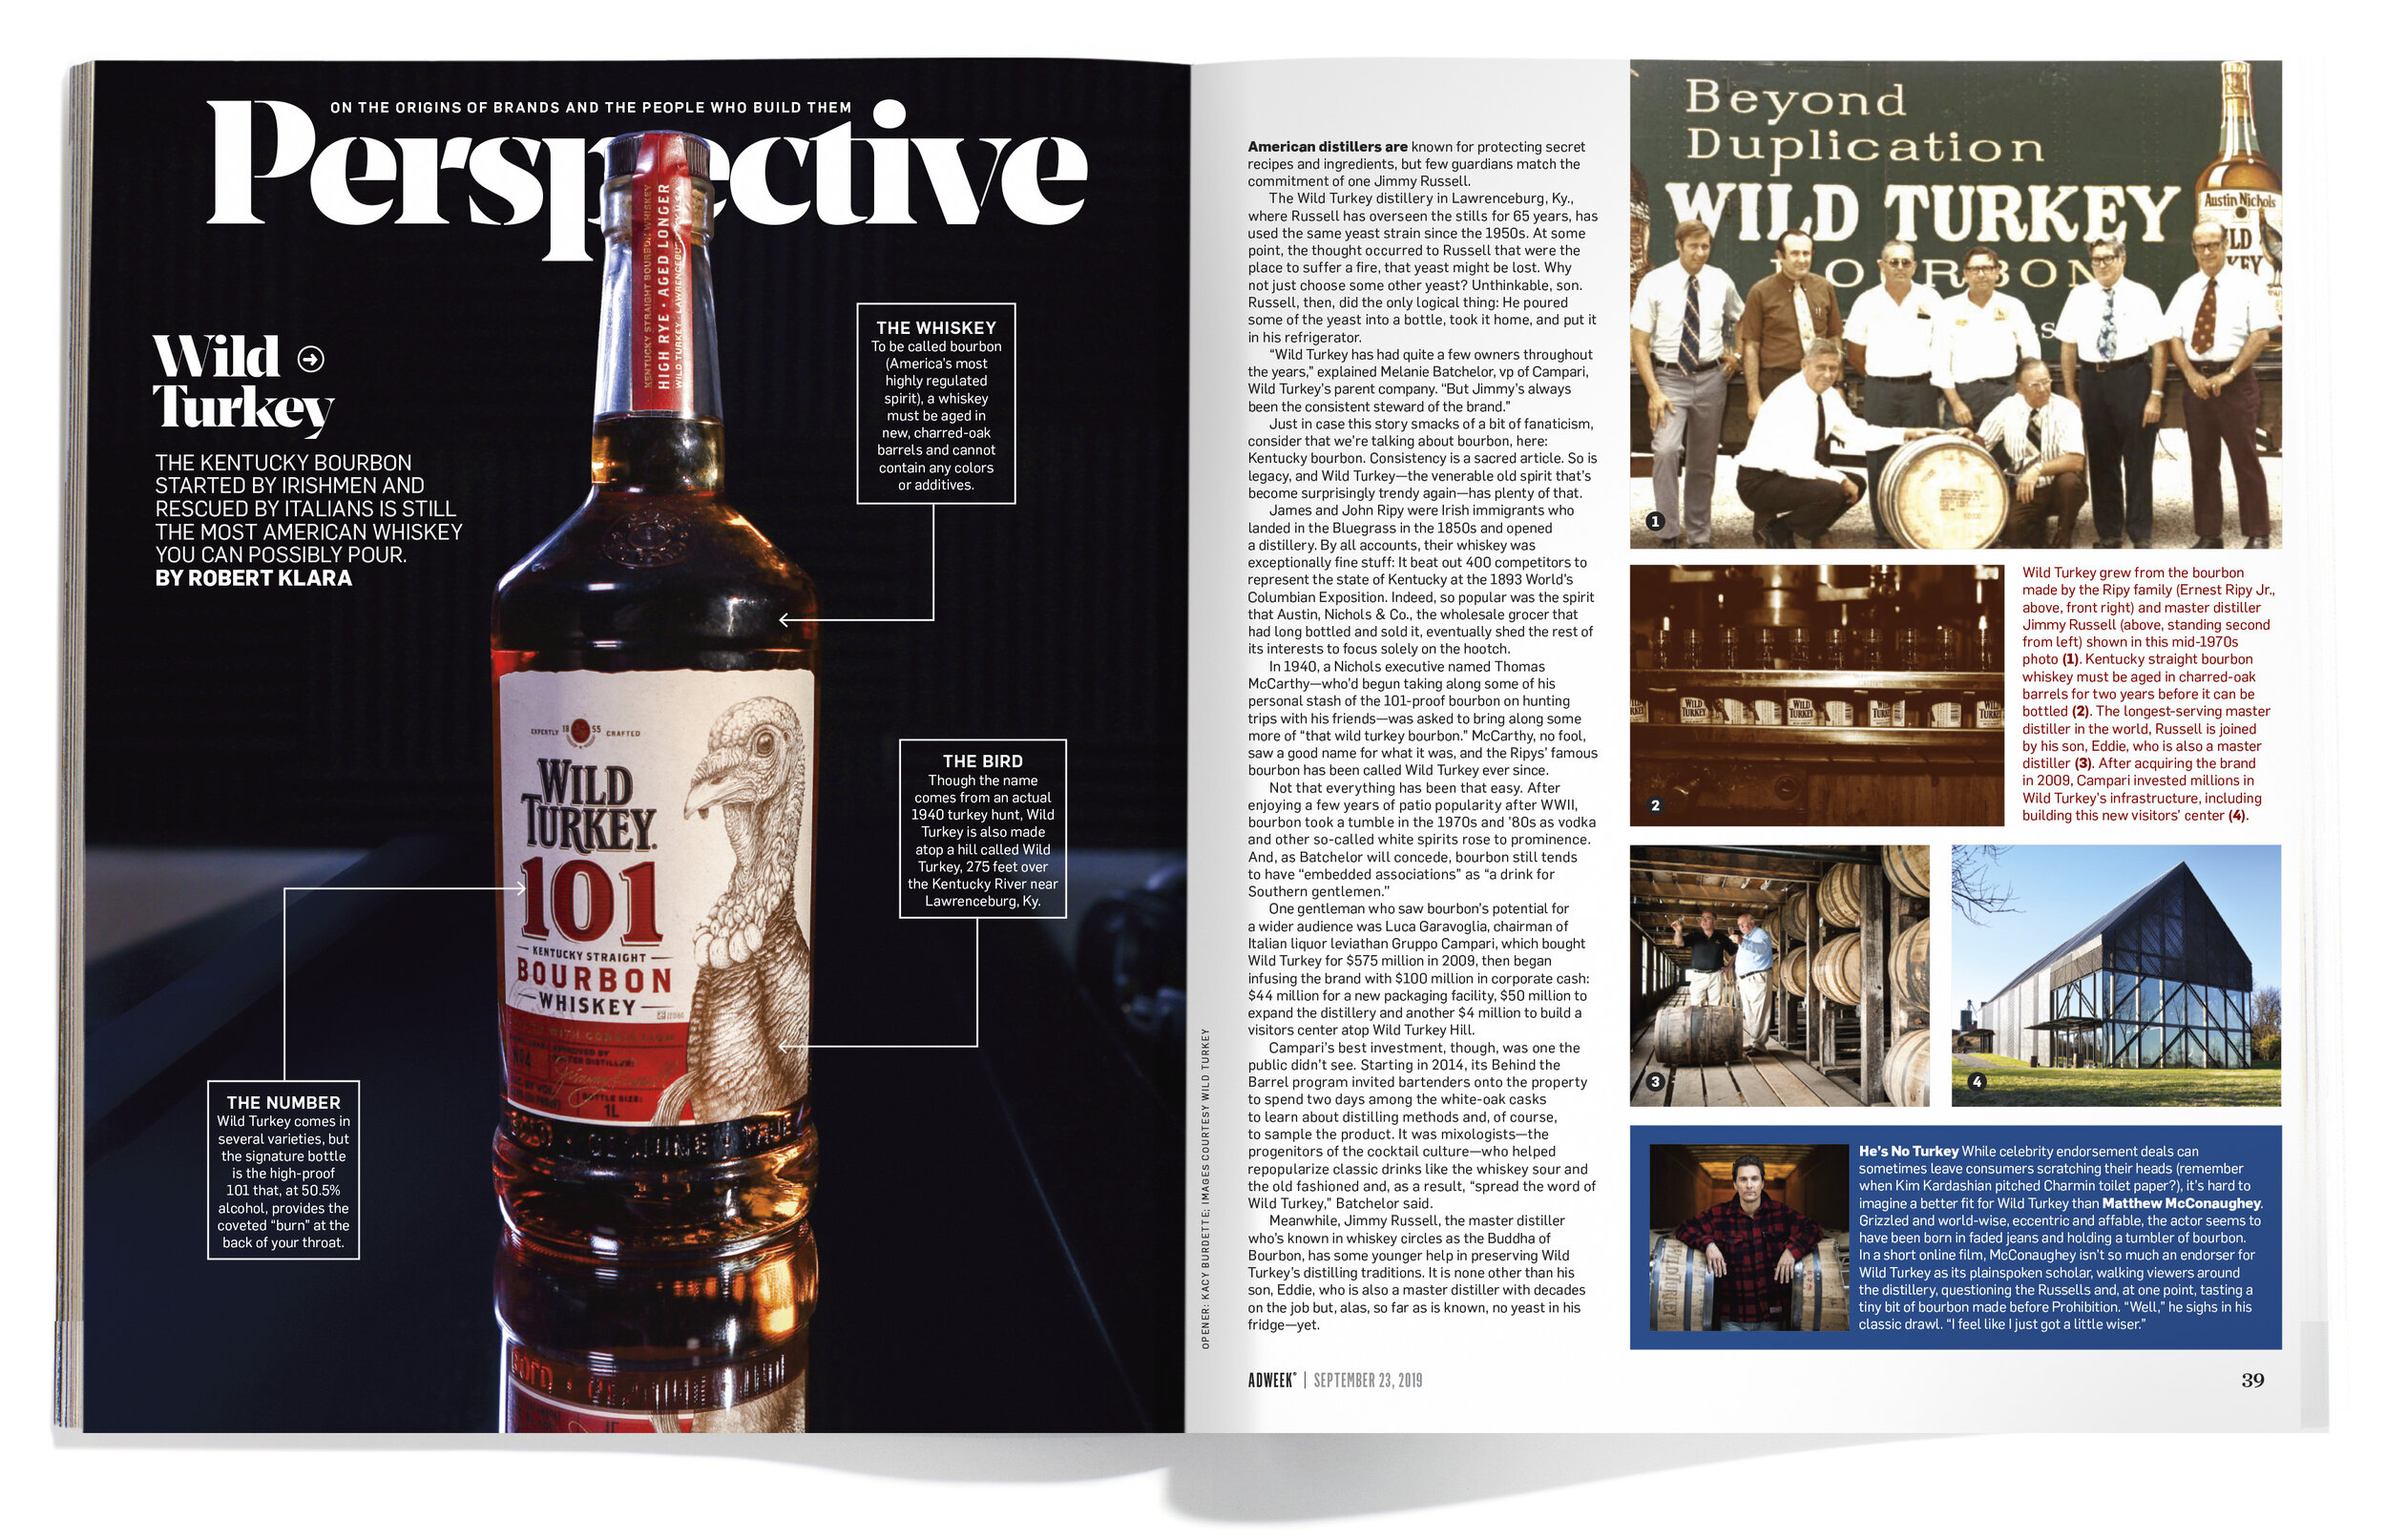   Adweek    How a Famous Kentucky Bourbon Became Wild Turkey—On a Hunt  